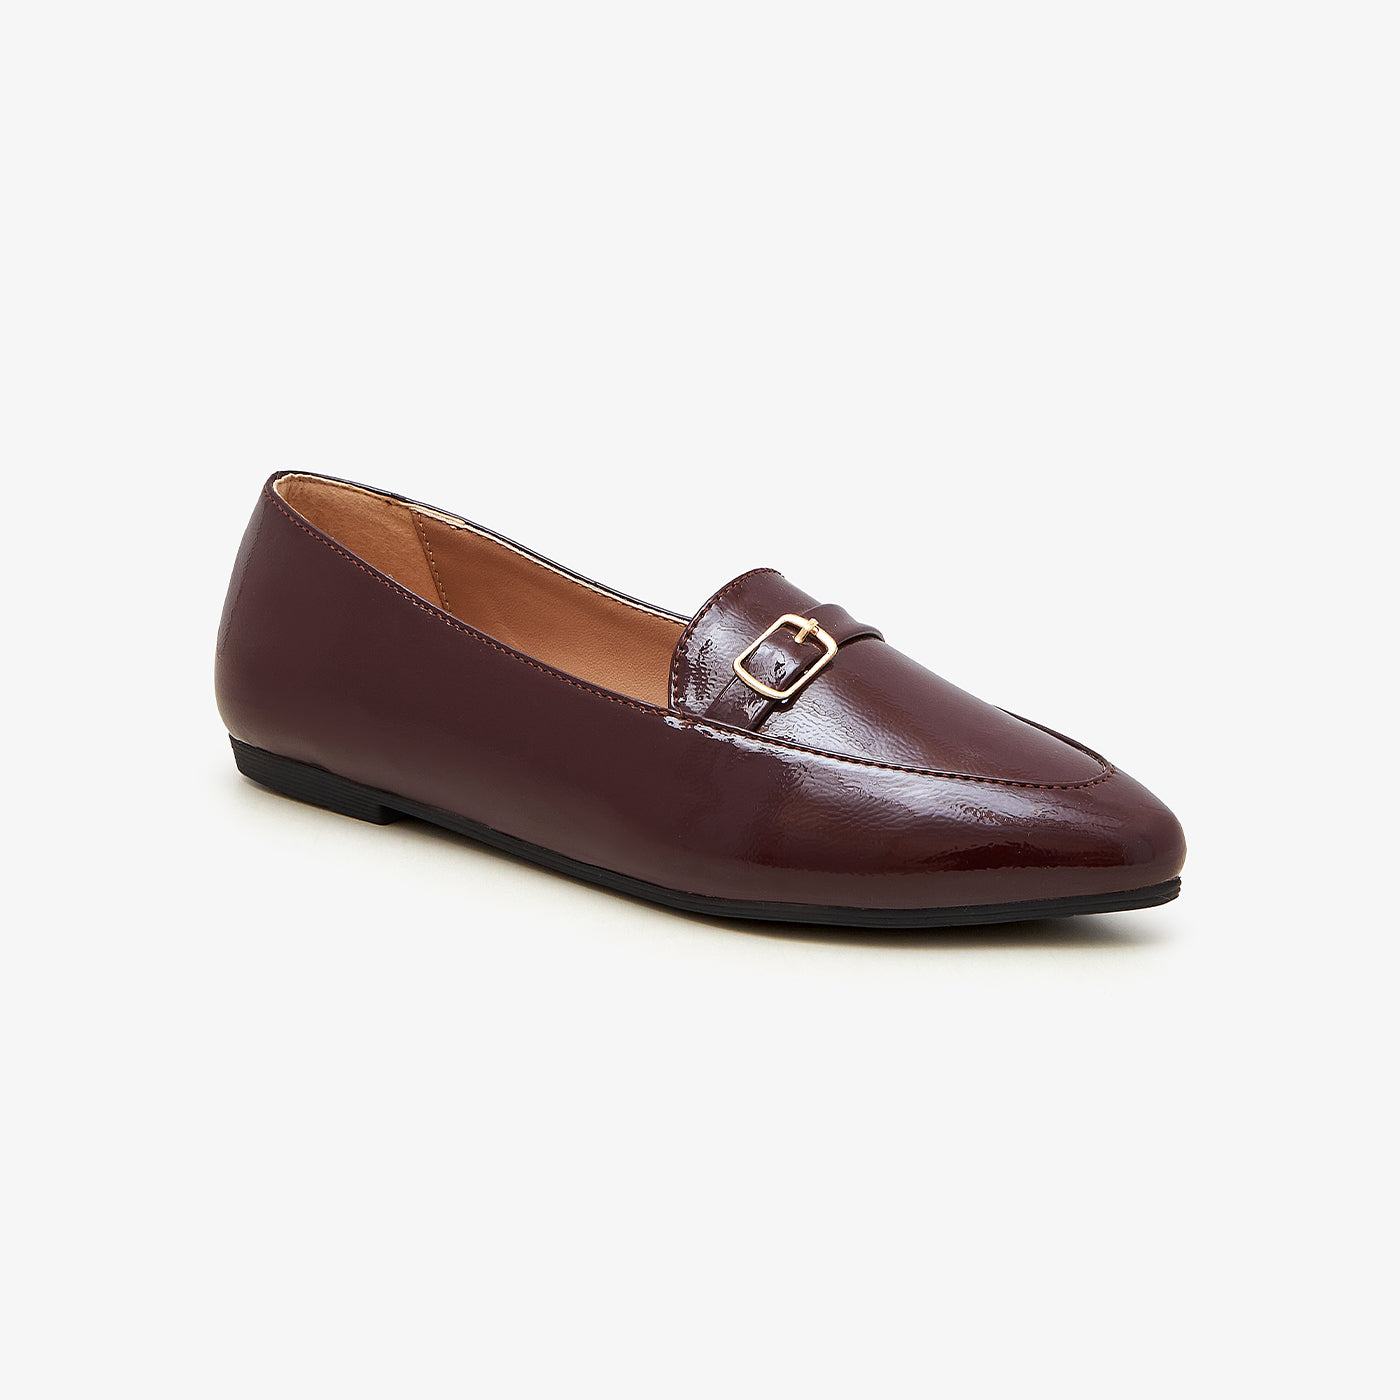 Women's Buckled Loafers